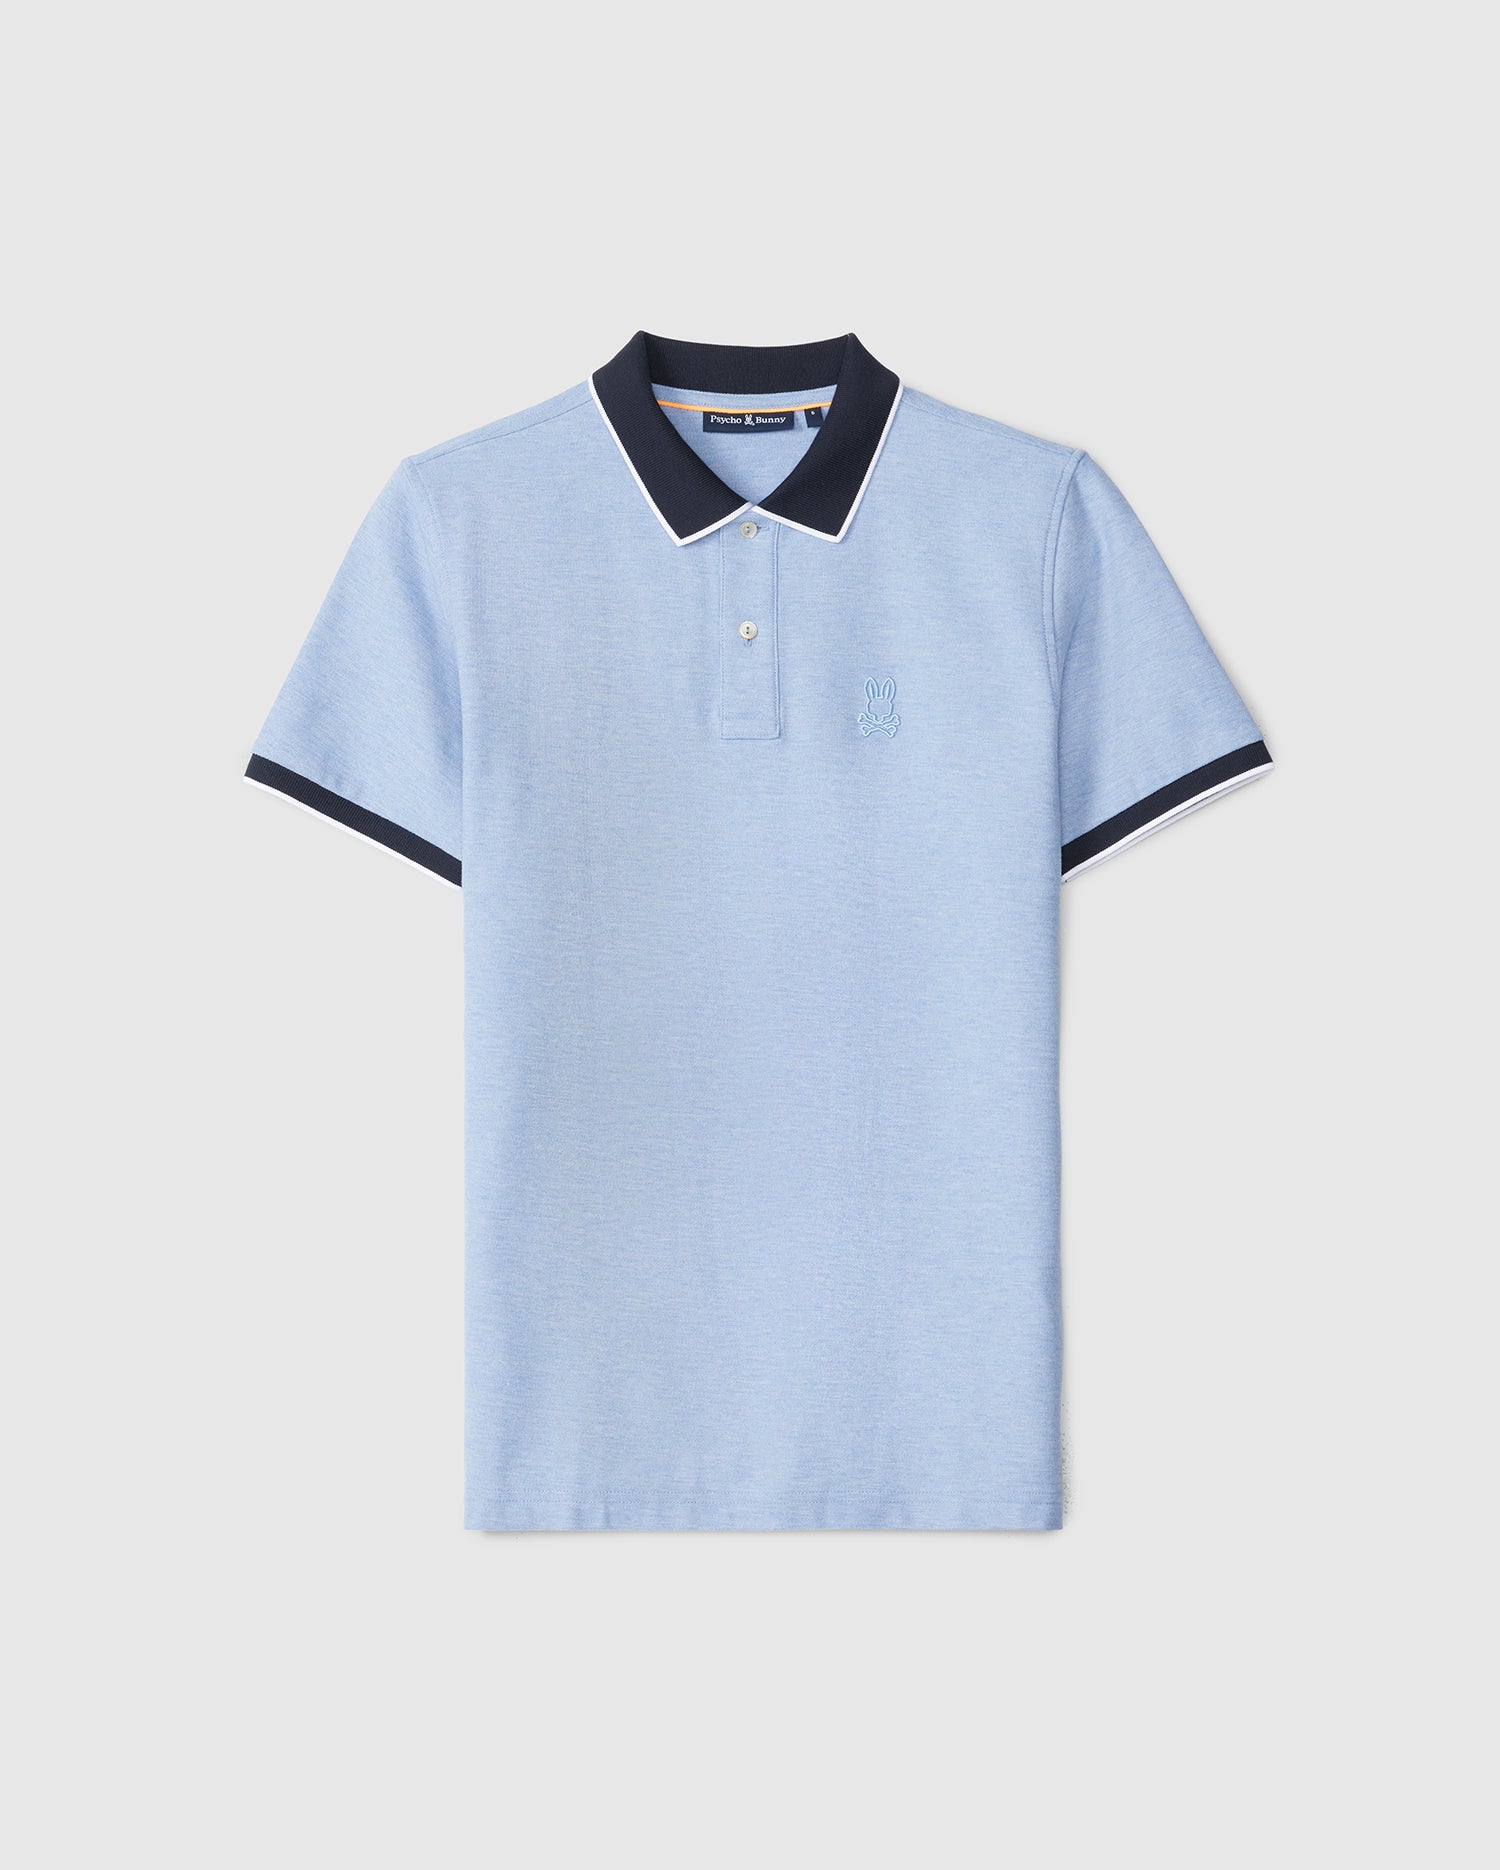 A light blue Psycho Bunny MENS WINDCREST PIQUE POLO SHIRT - B6K592C200 made of luxurious Pima cotton, featuring dark blue sleeve cuffs and collar with white piping accents. The shirt sports a small embroidered Bunny logo on the left chest and has a button-down placket.